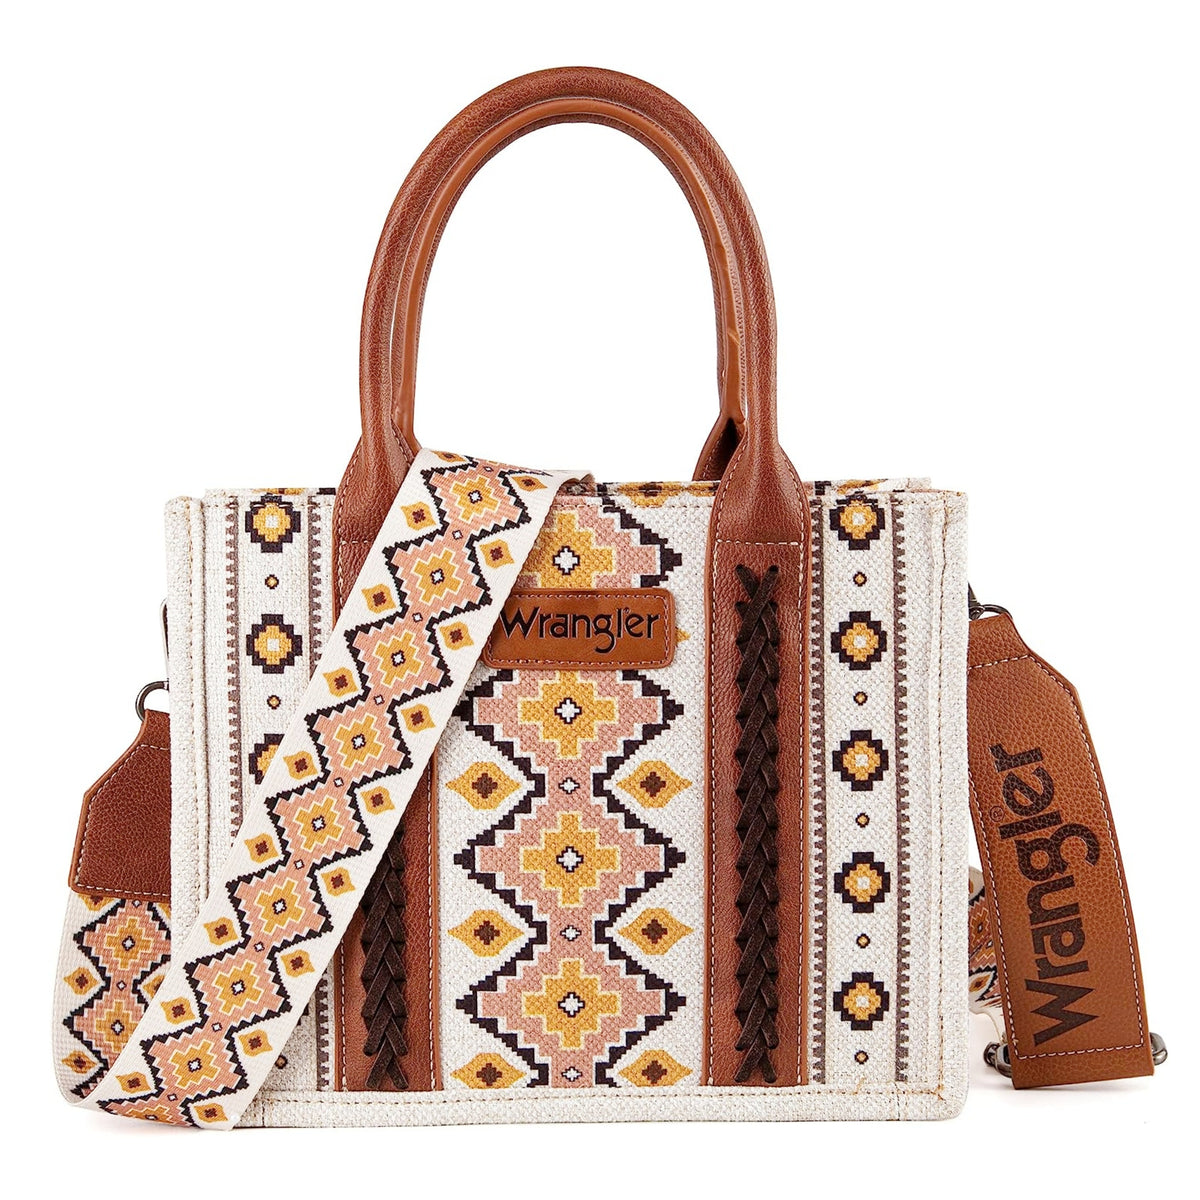 [Best Seller]Wrangler Southwestern Dual Sided Print Canvas Tote/Crossbody Collection - Cowgirl Wear